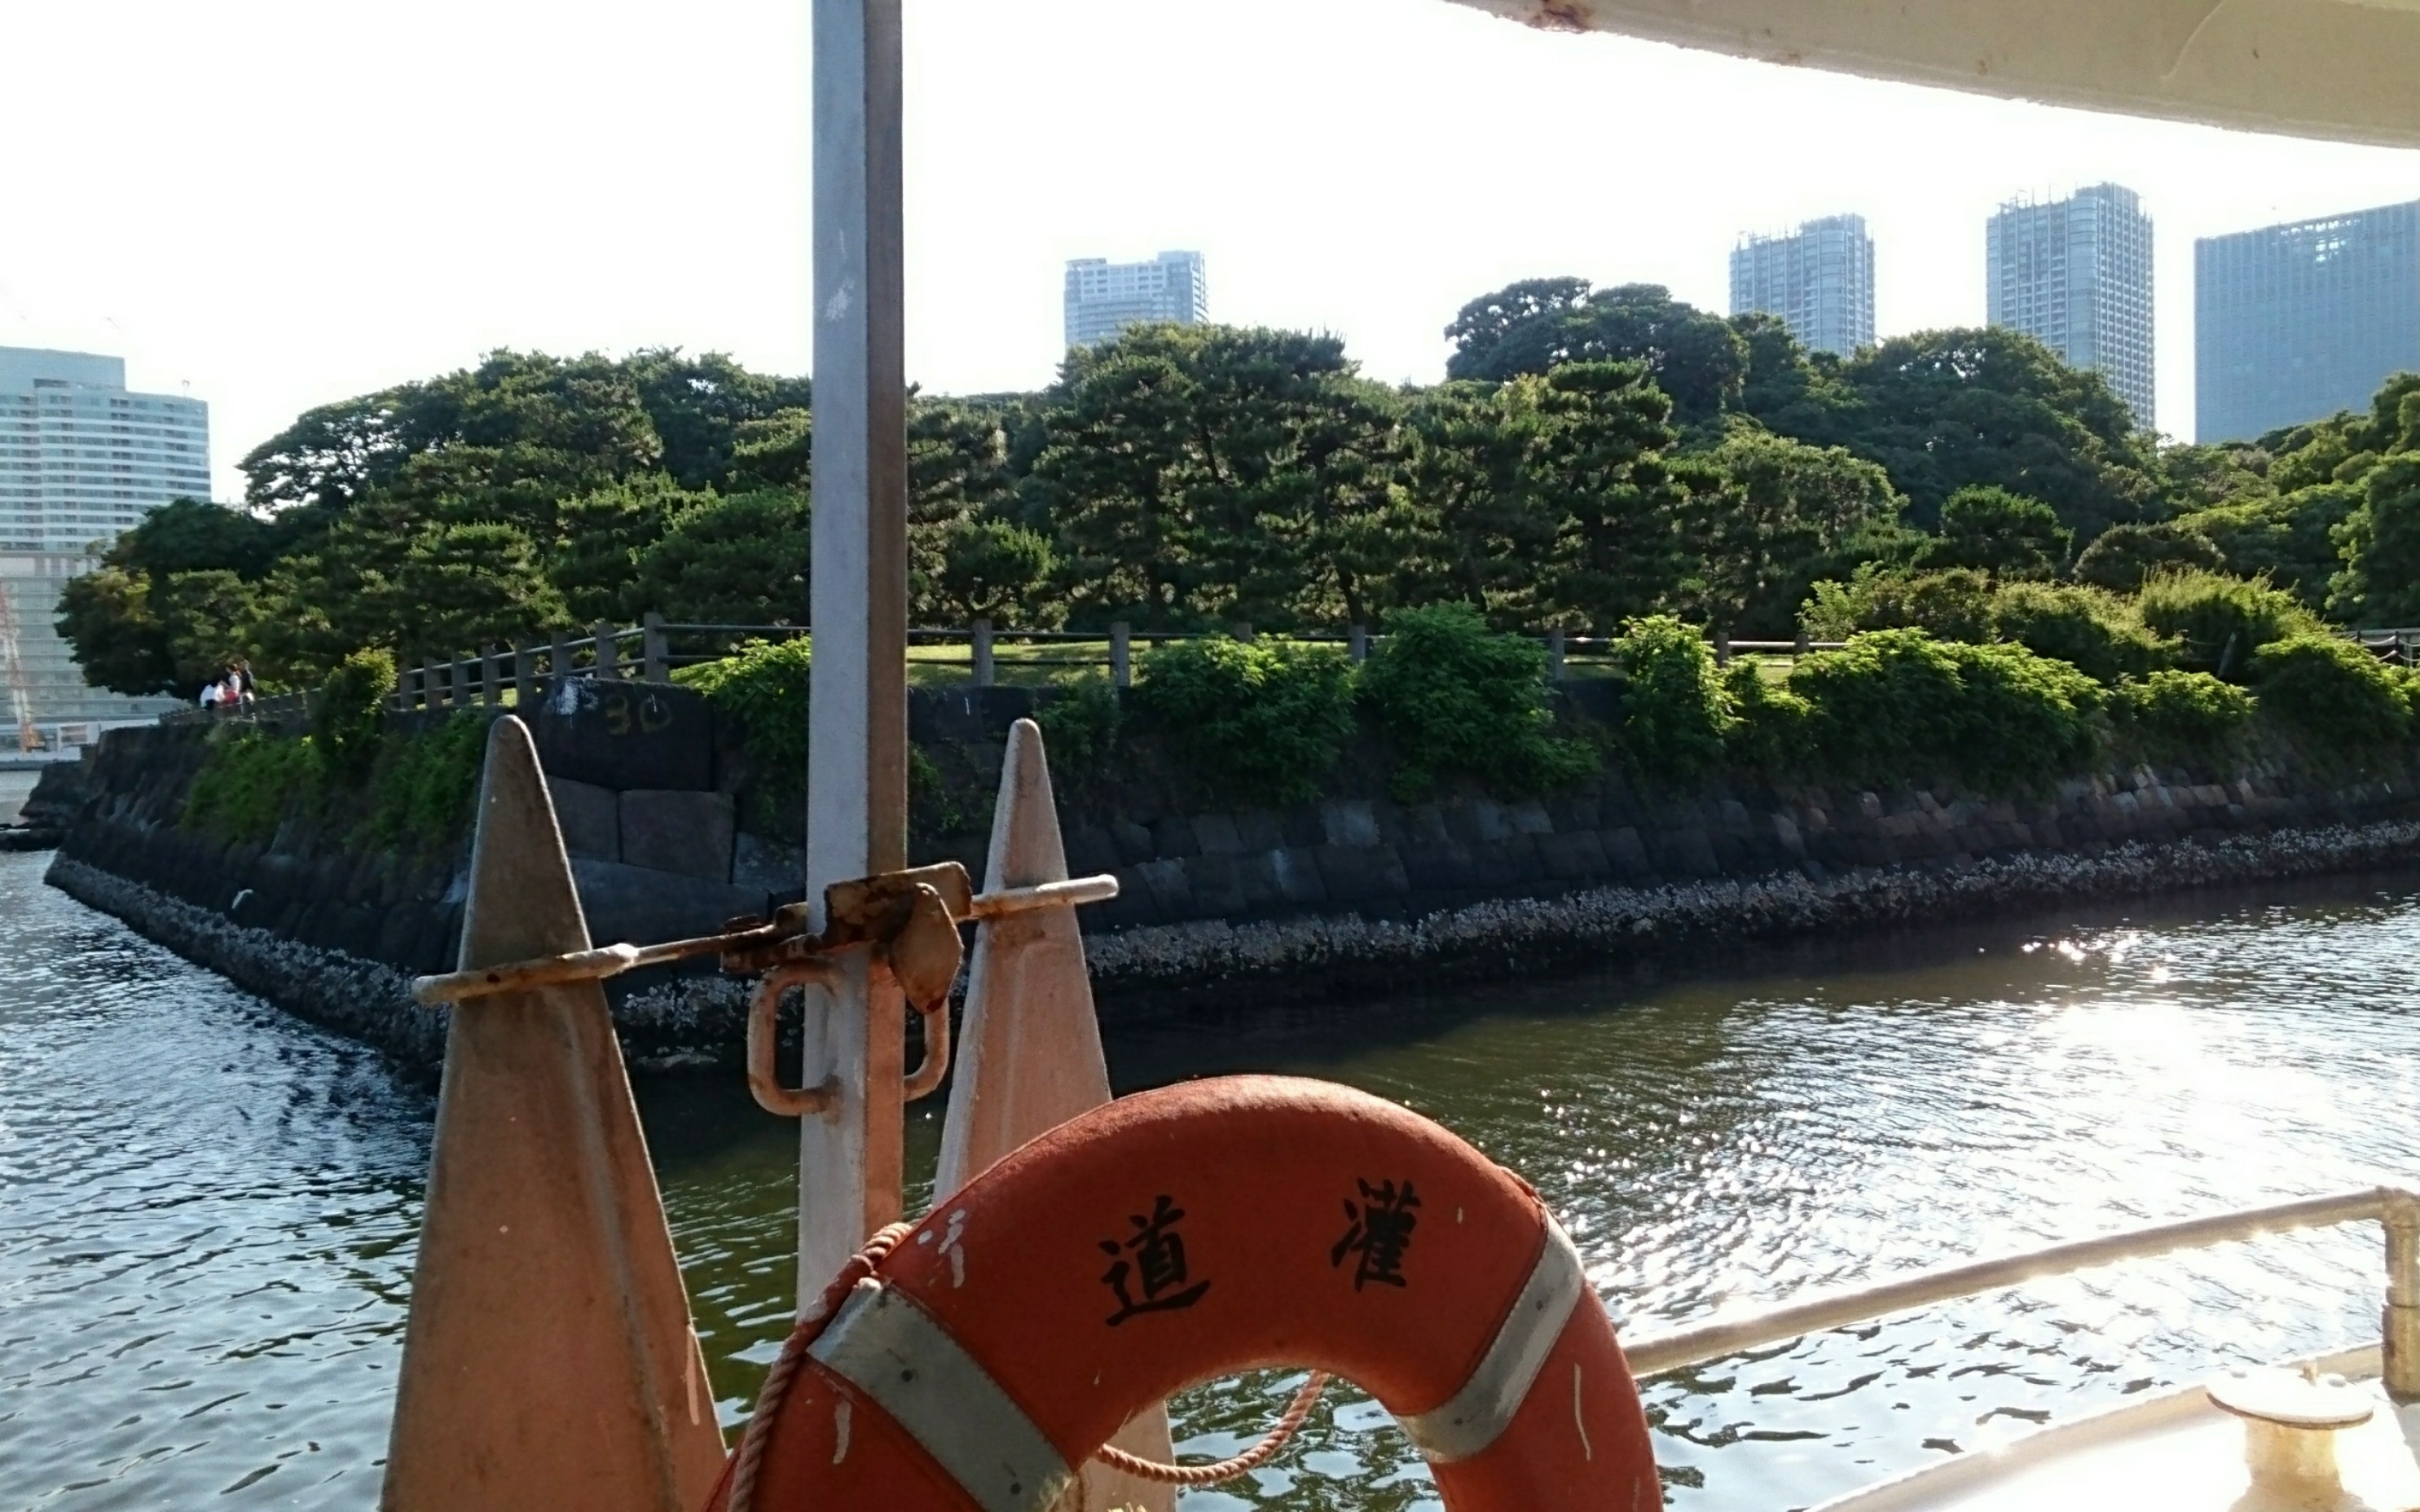 Take the waterbus at the pier of the garden to Asakusa!!(About 1 hour boat cruise on the Sumida River)  